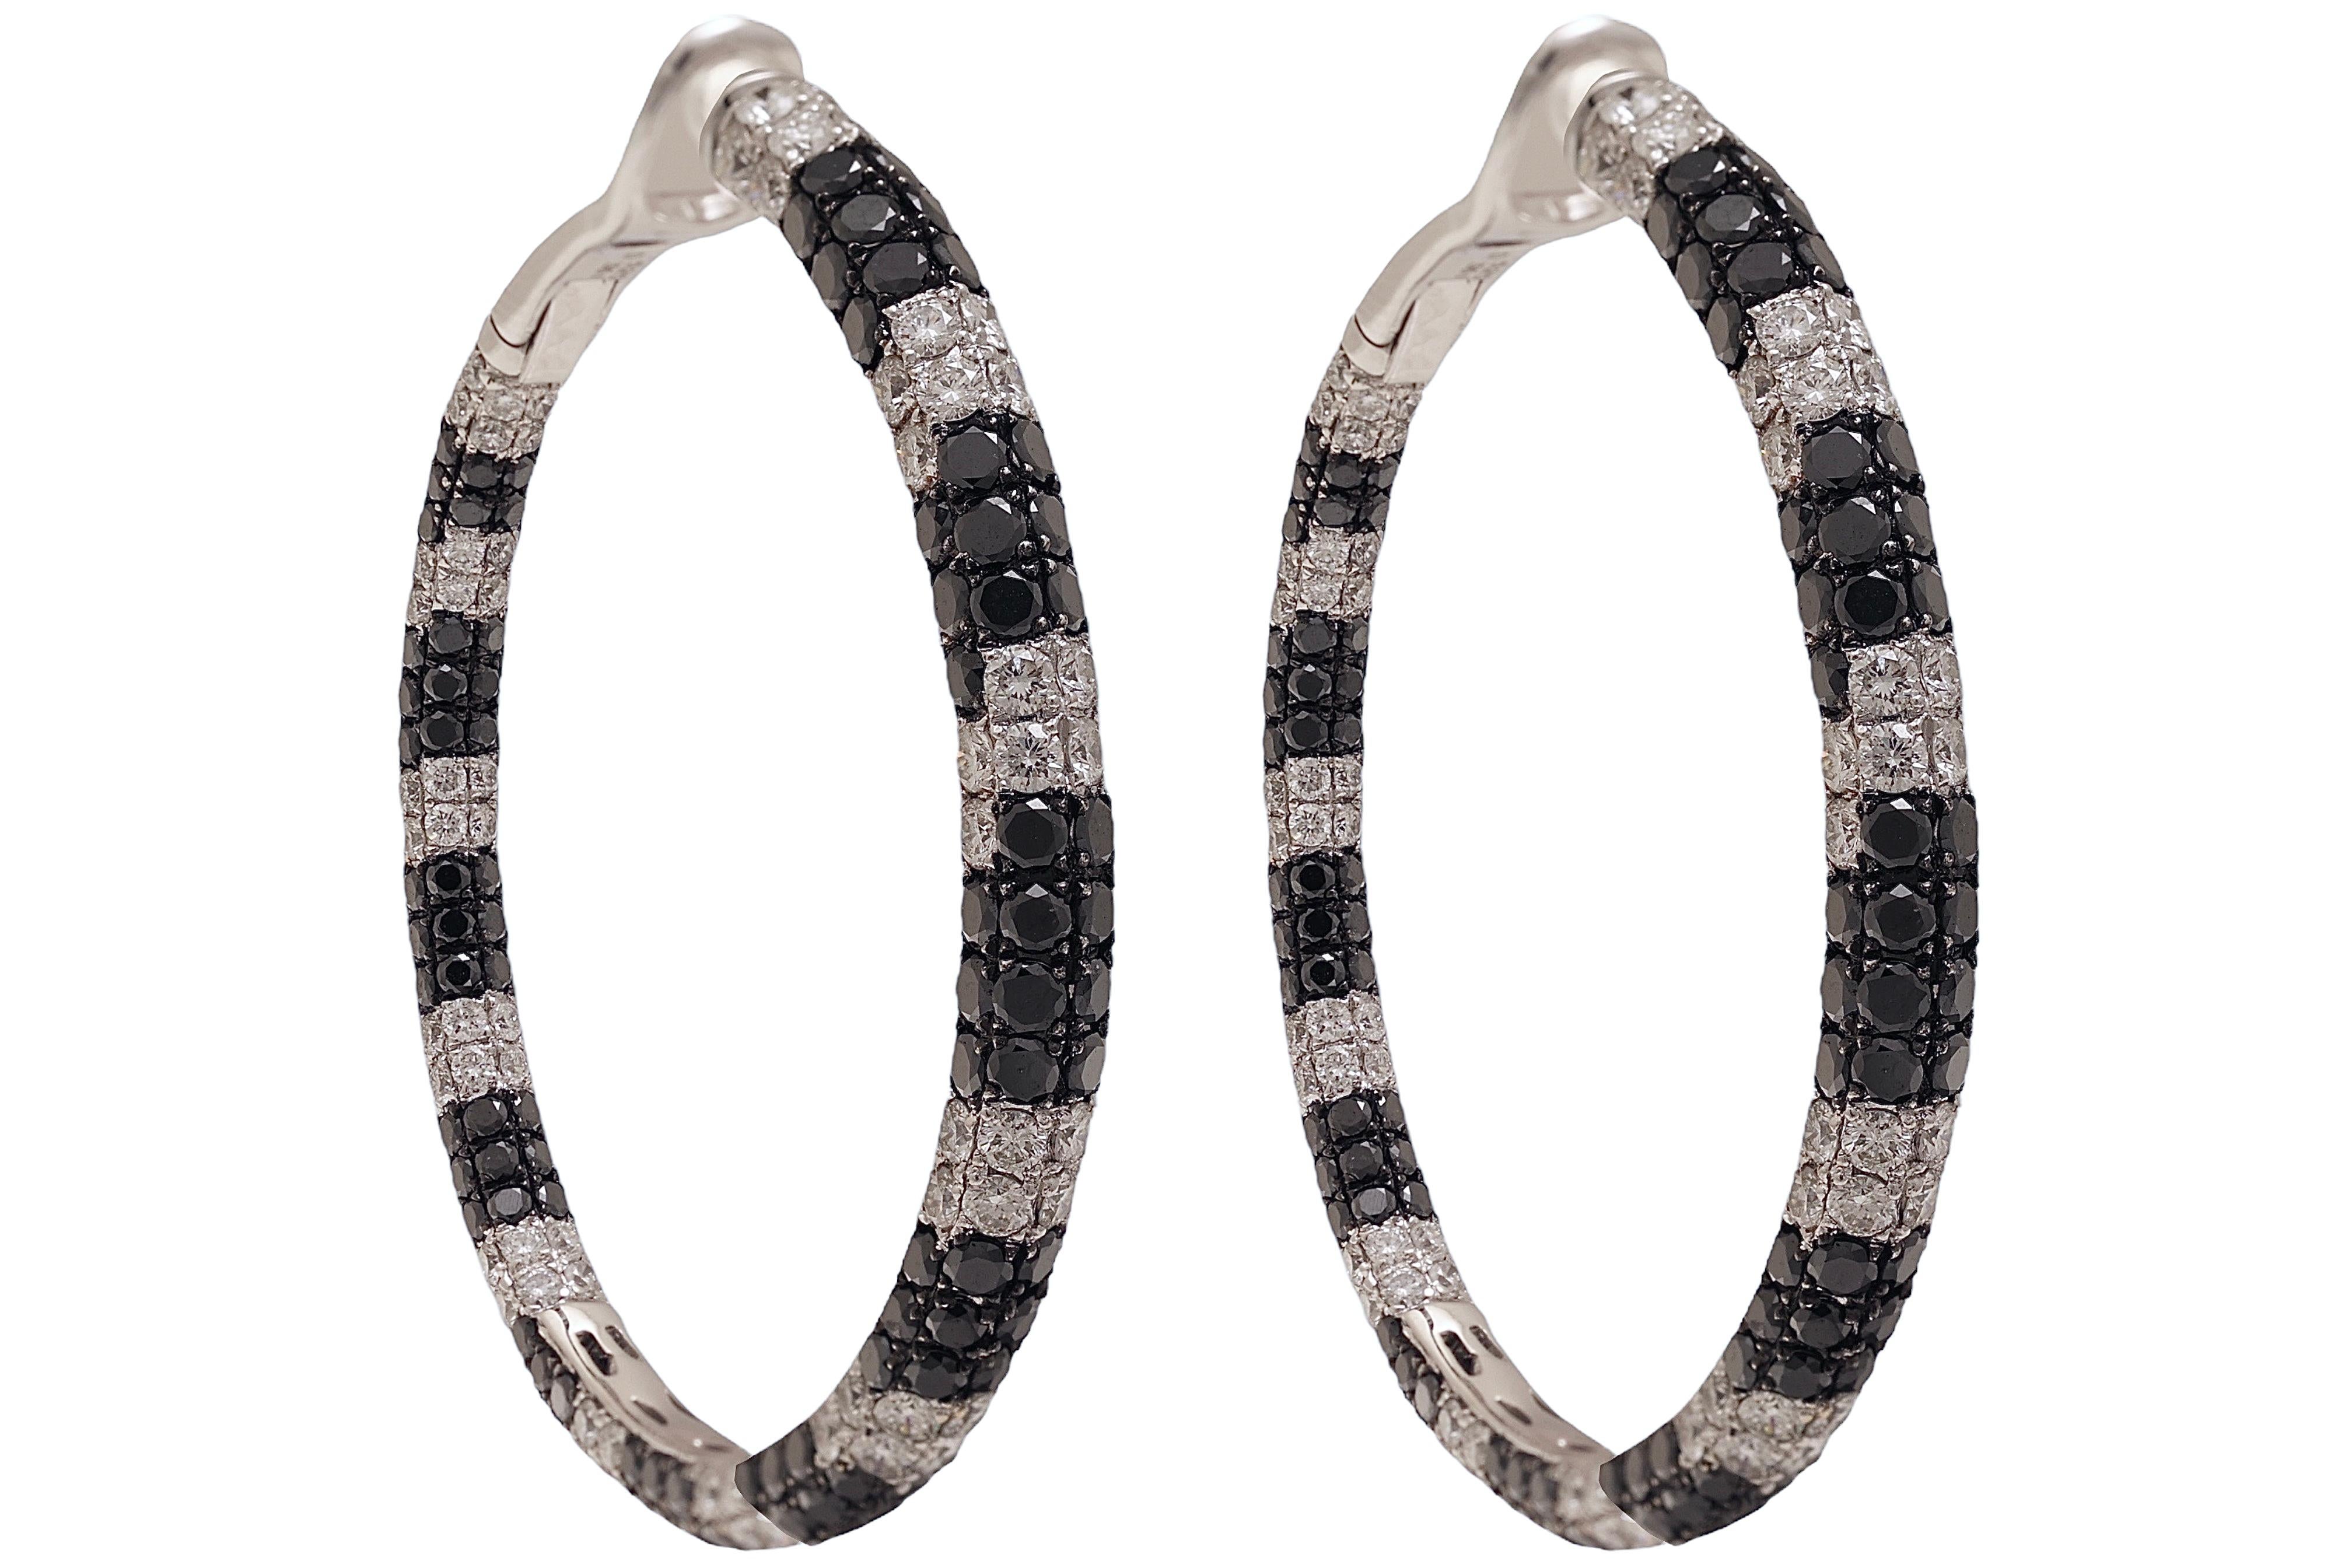 18 Kt White Gold Black & White 3,79 Ct Diamonds Hoop Earrings

Amazing Big Class Hoop Earrings which will make you shine from far !

Diamonds : Black & White 3.79 Ct Beautiful Quality

Measurements: diameter: 43.9 mm 

Total weight: 17.4 gram 0.615